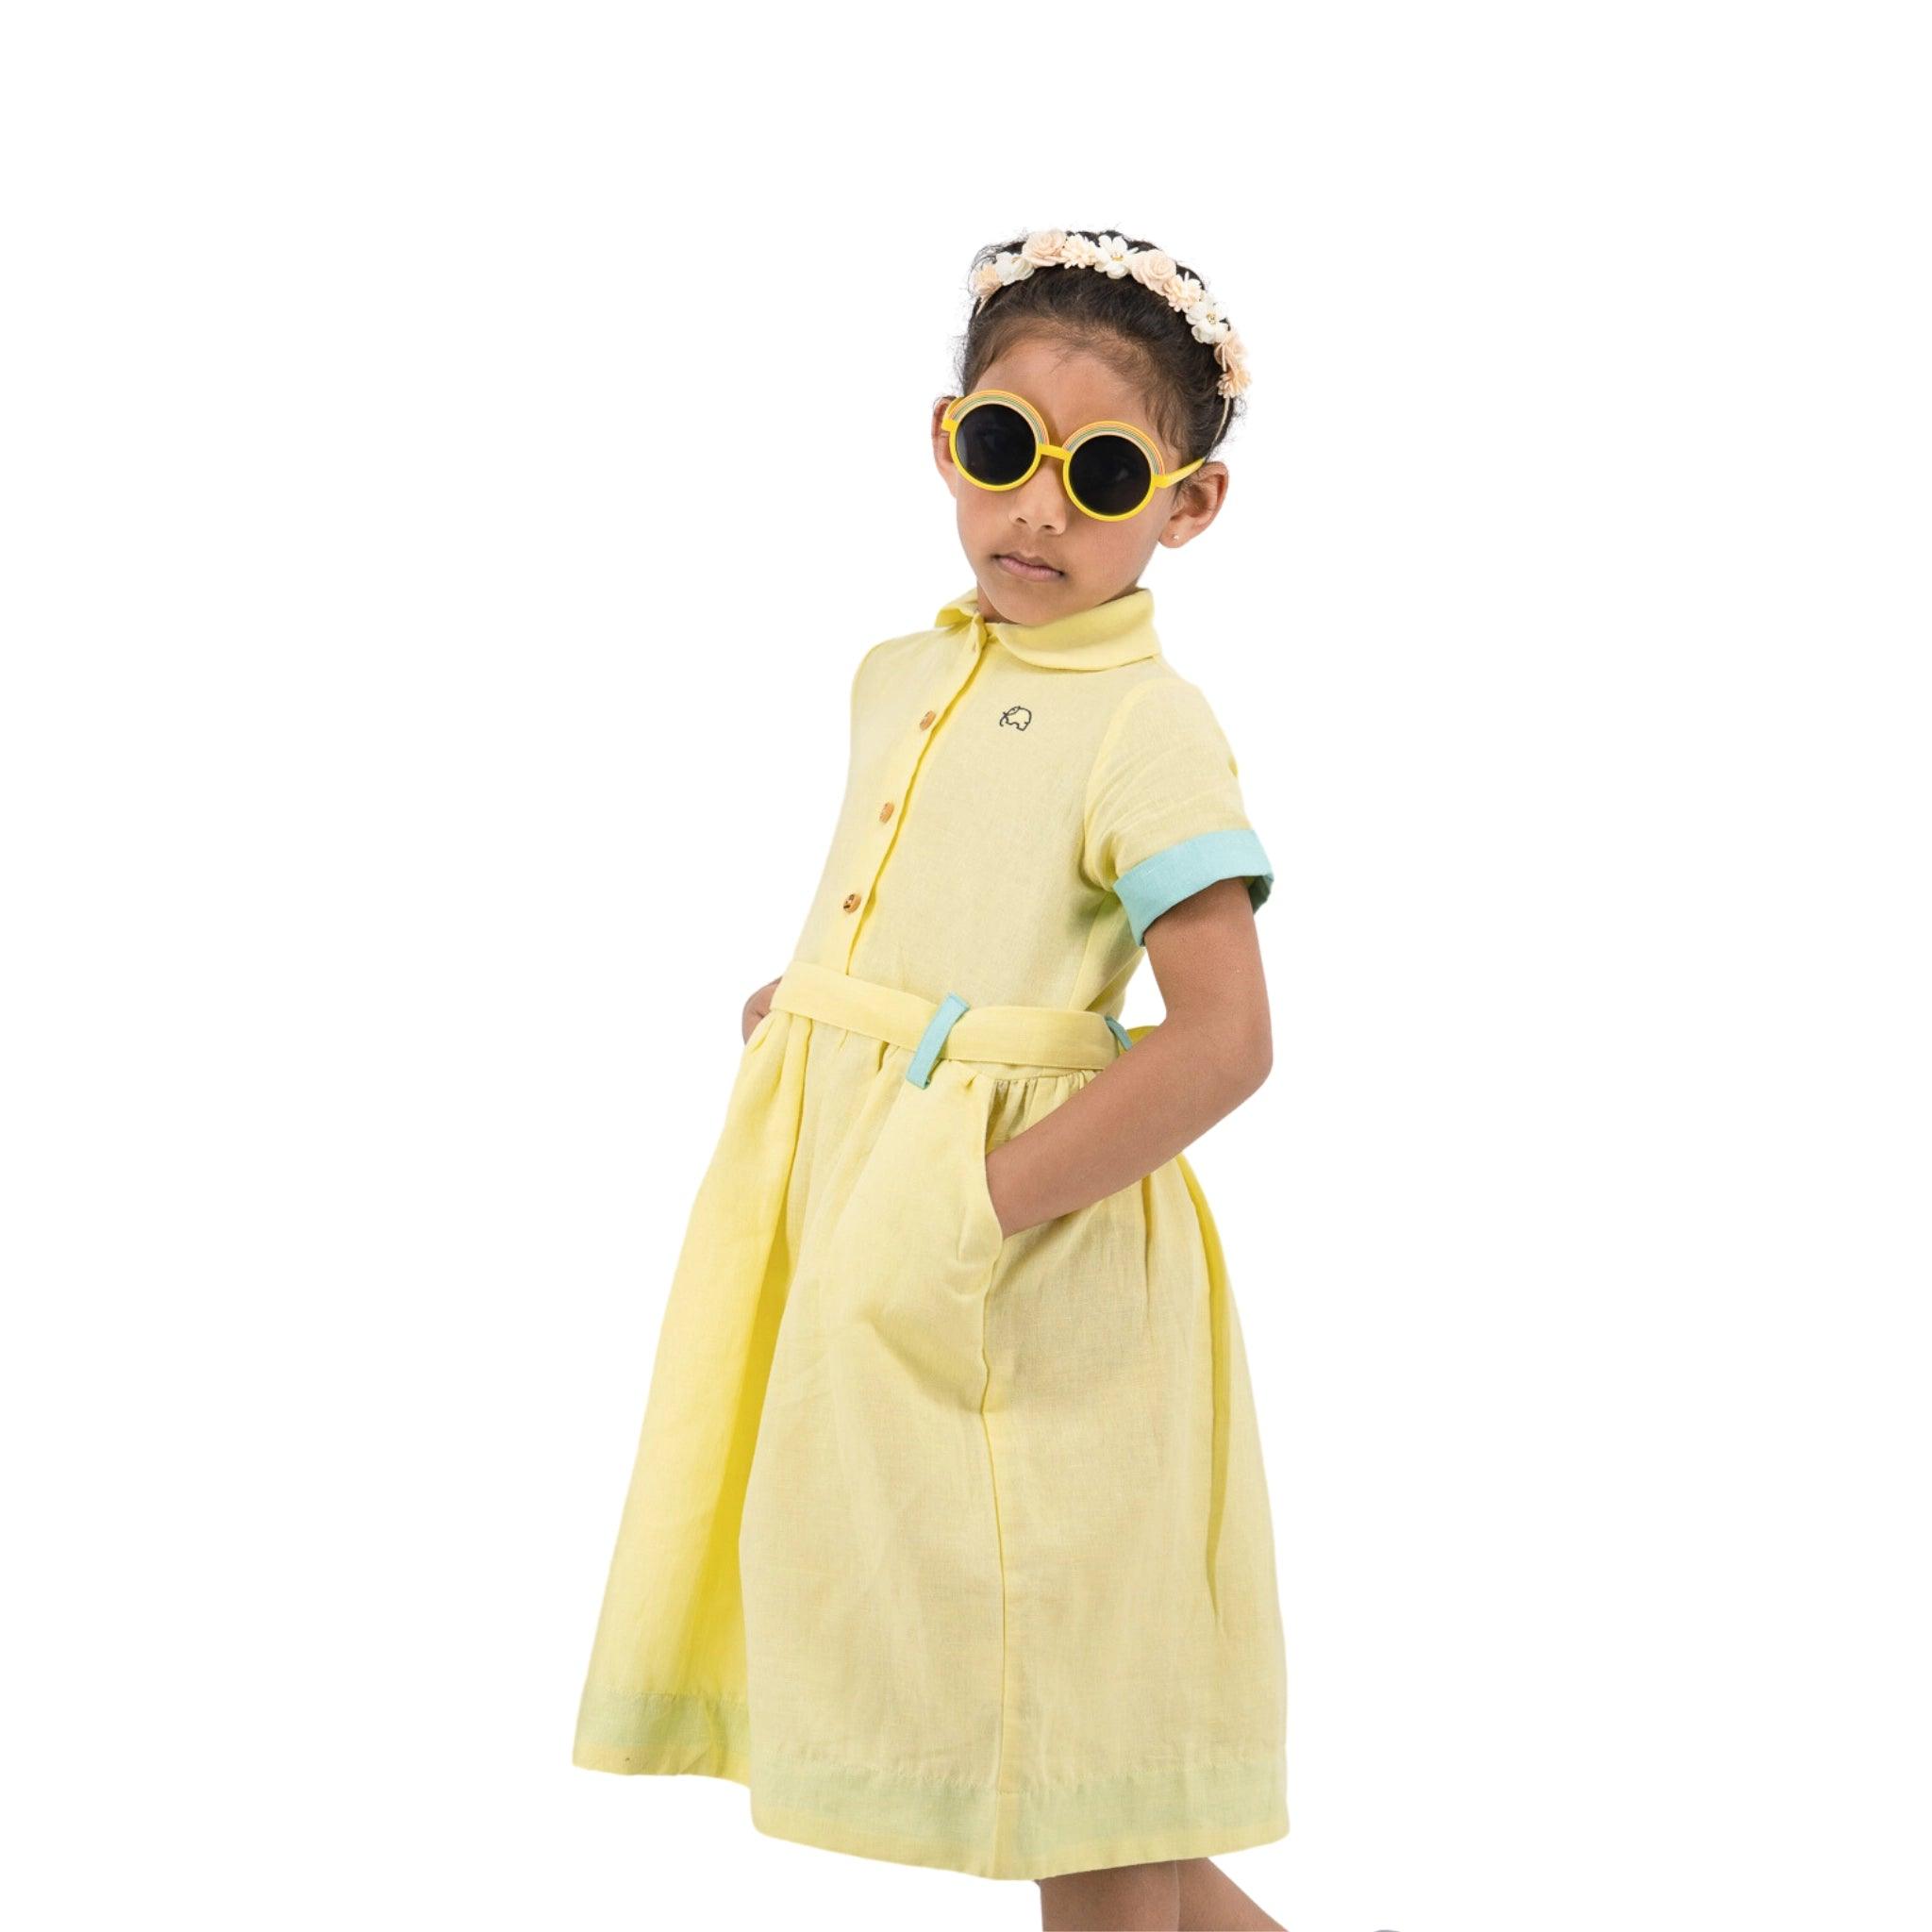 Young girl posing in a stylish Karee elfin yellow linen below knee length dress and sunglasses, with a white floral headband, against a white background.